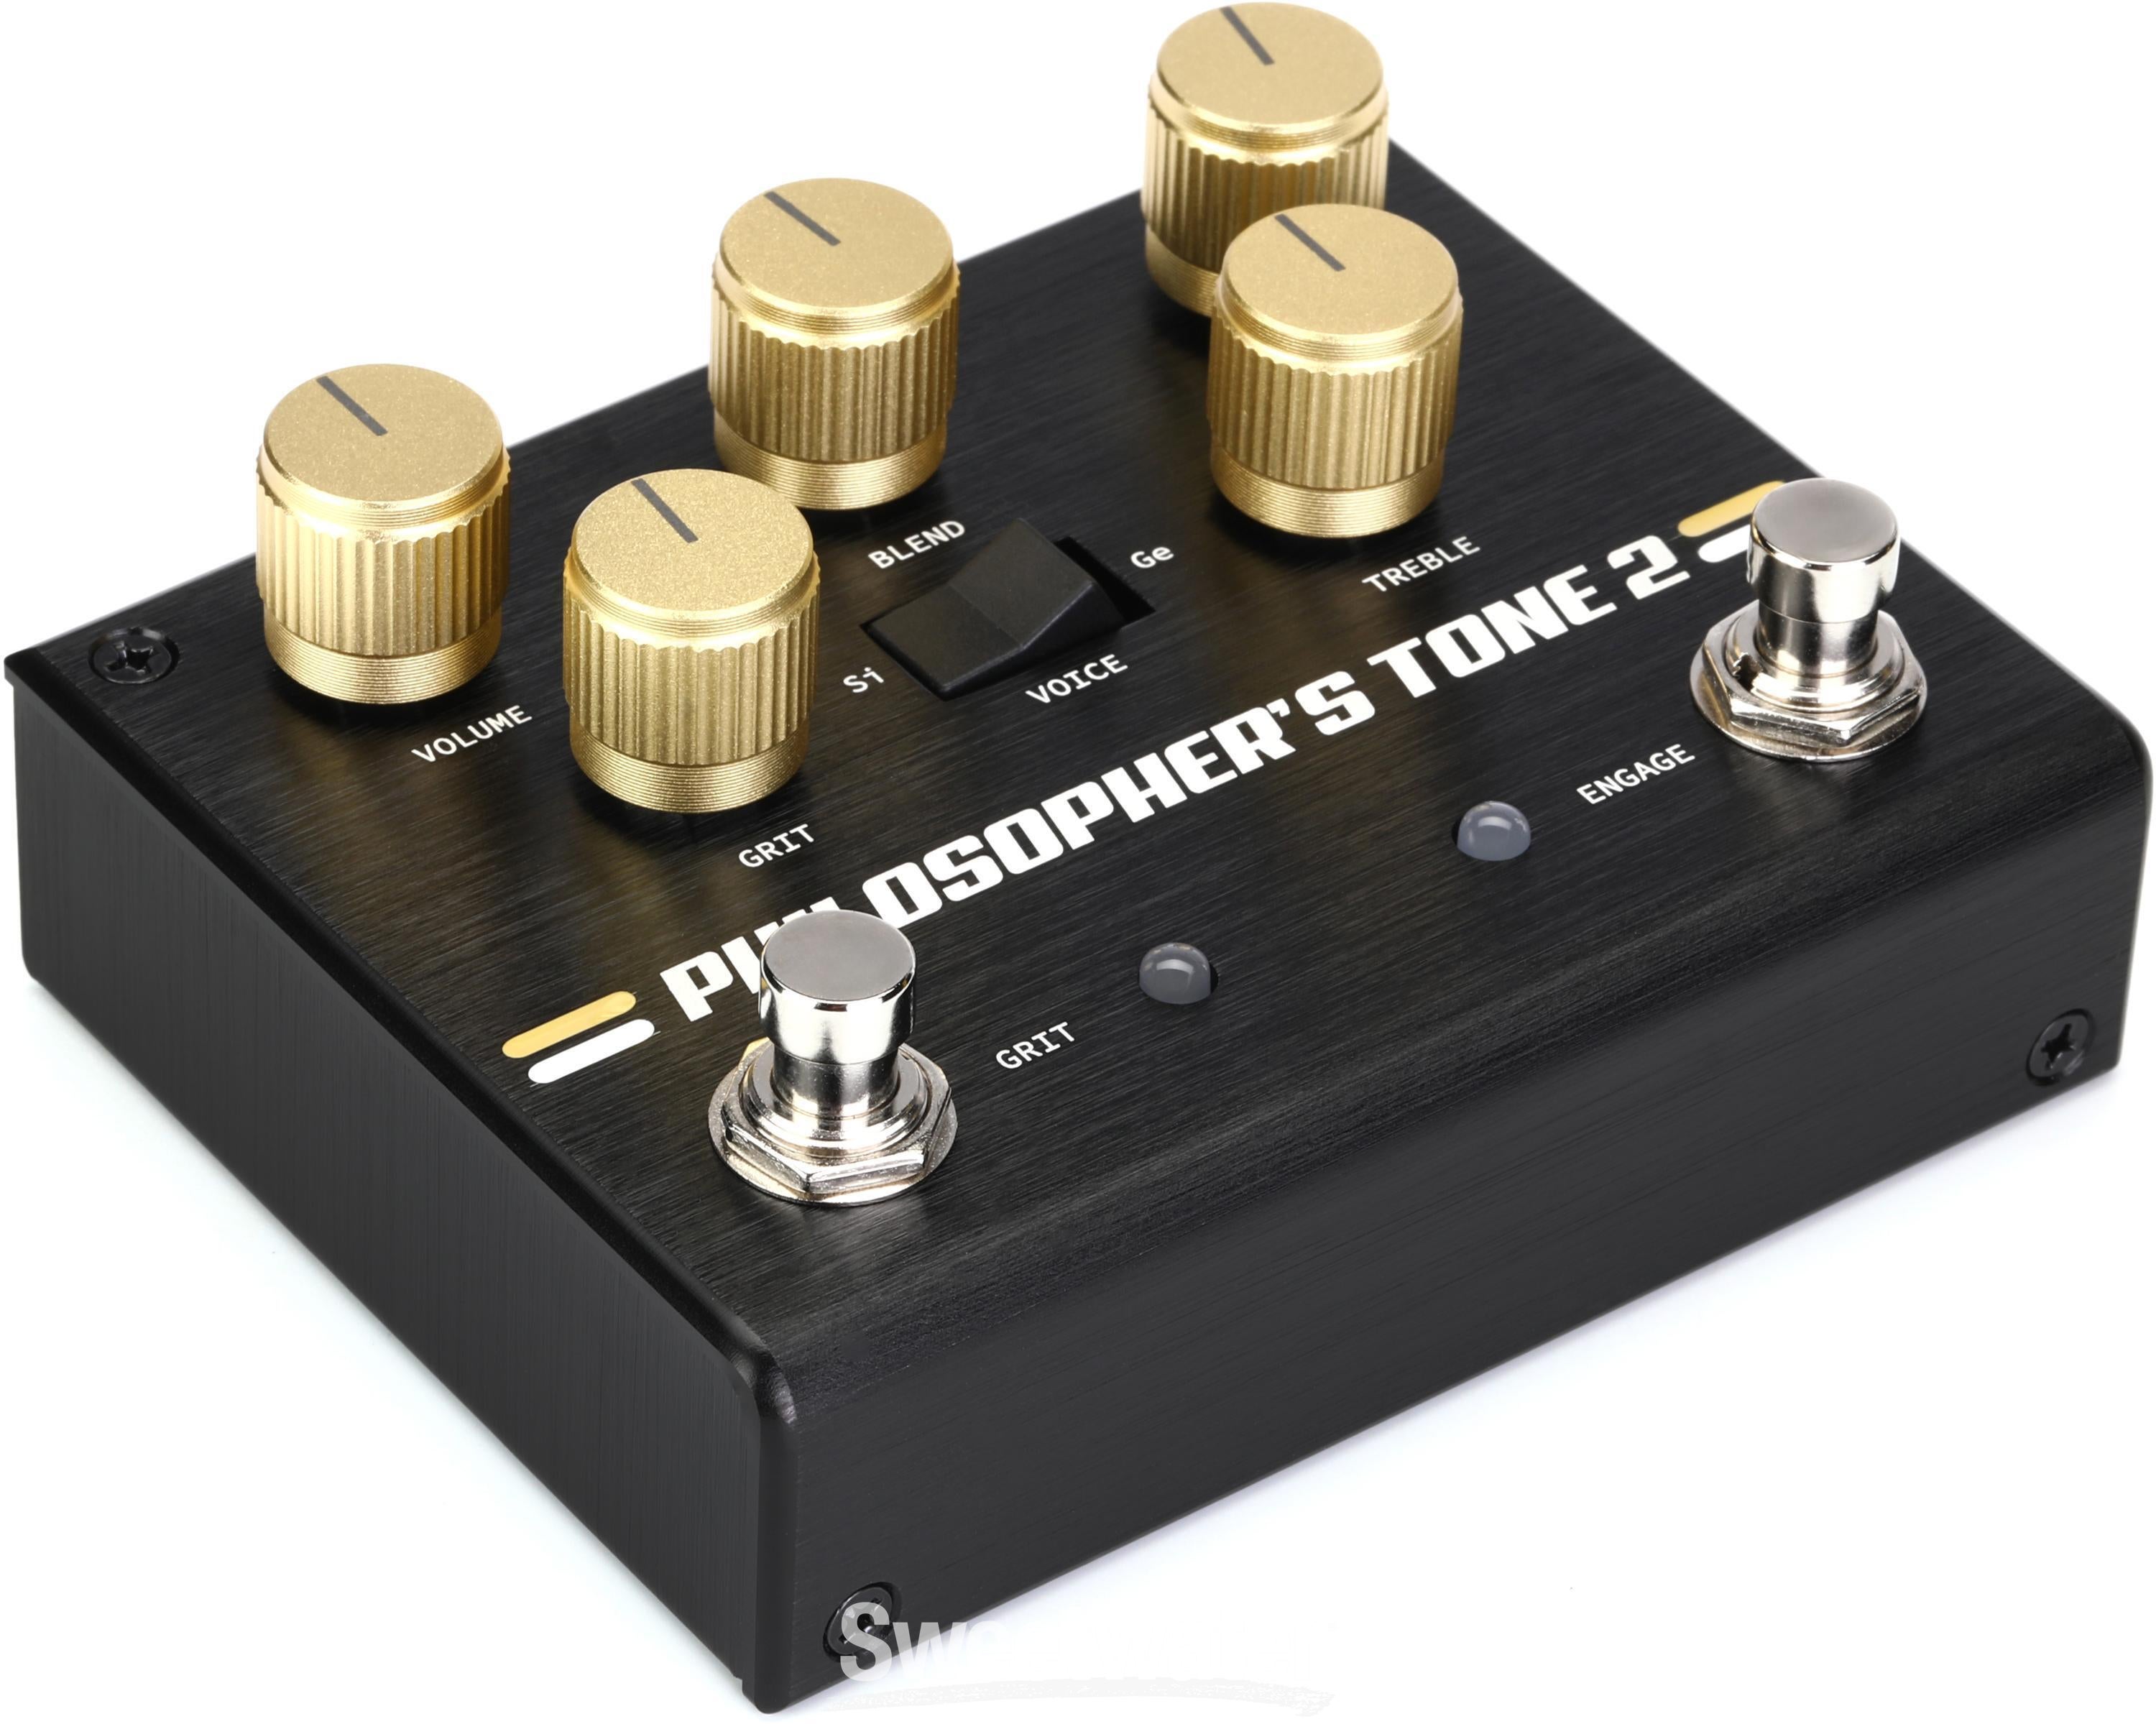 Pigtronix Philosopher's Tone 2 Optical Compressor Pedal | Sweetwater